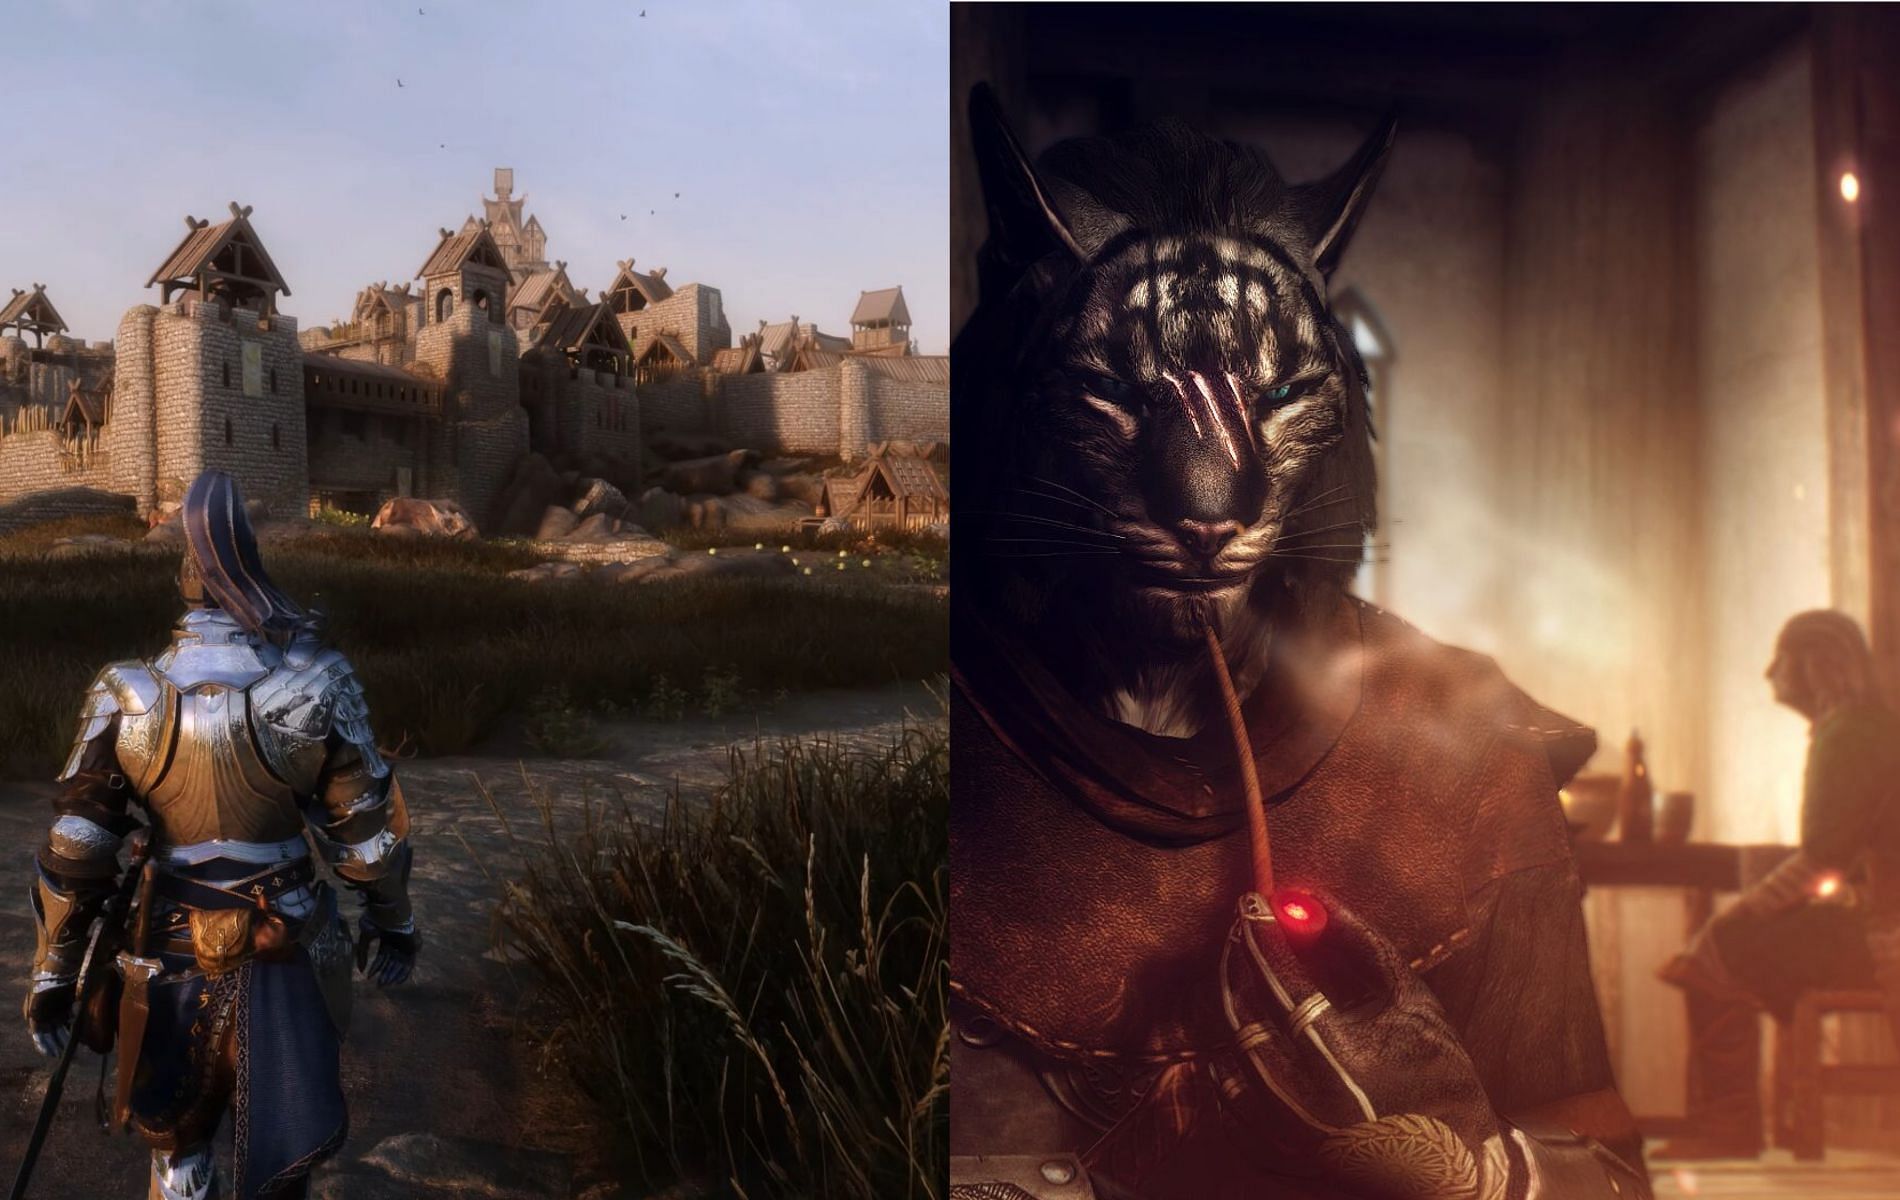 The Skyrim universe has produced some of the most entraling lore and lively characters (Images via Bethesda Softworks)